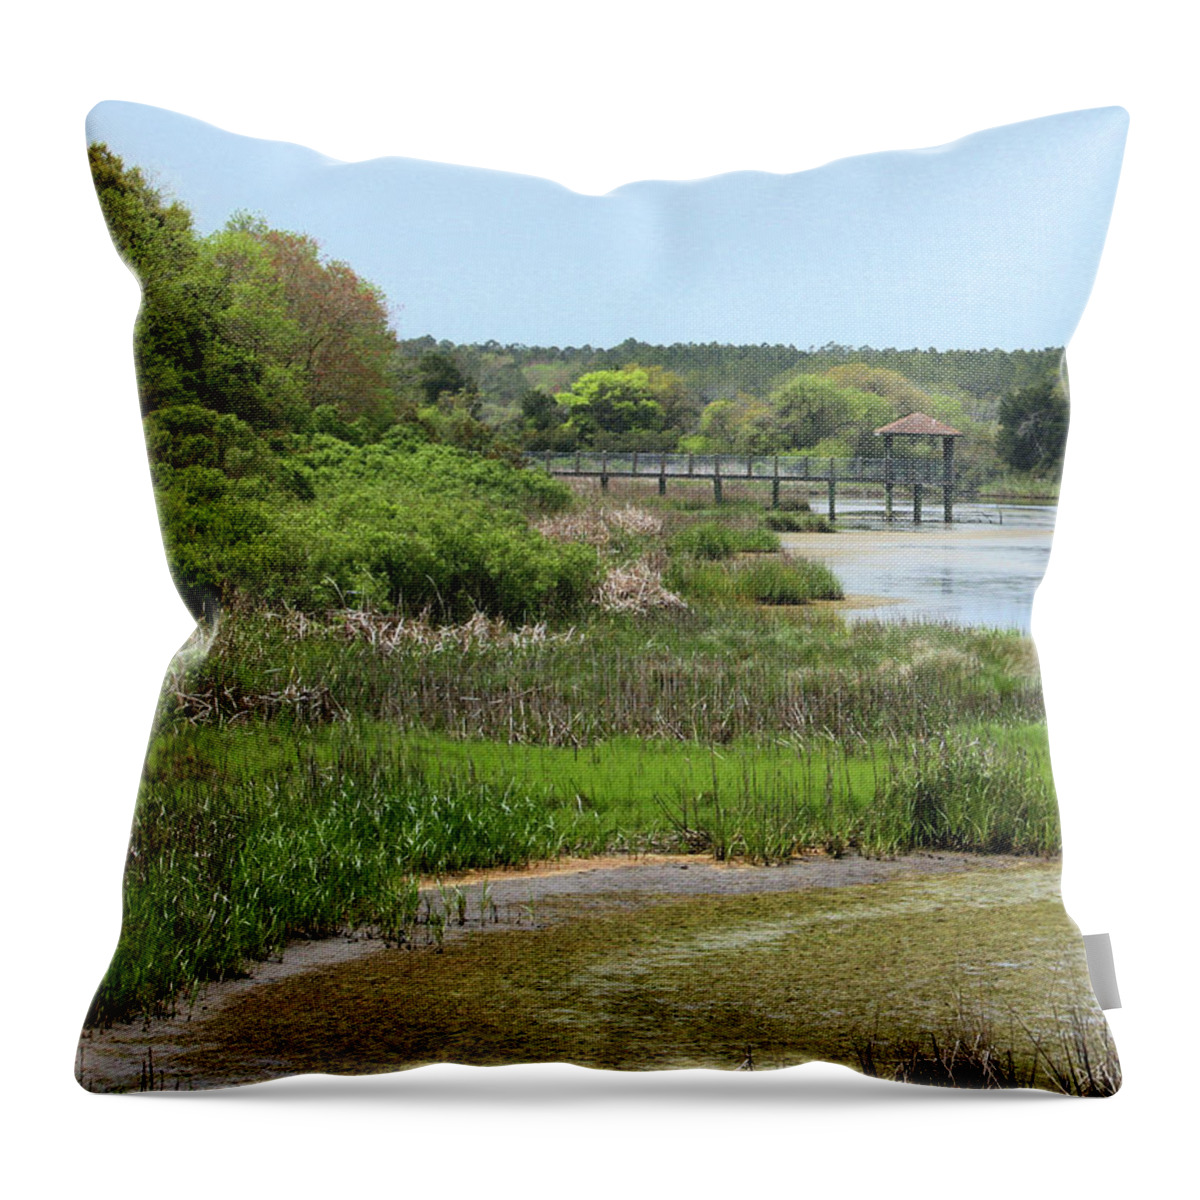 Swamp Throw Pillow featuring the photograph Marshlands by Cathy Harper